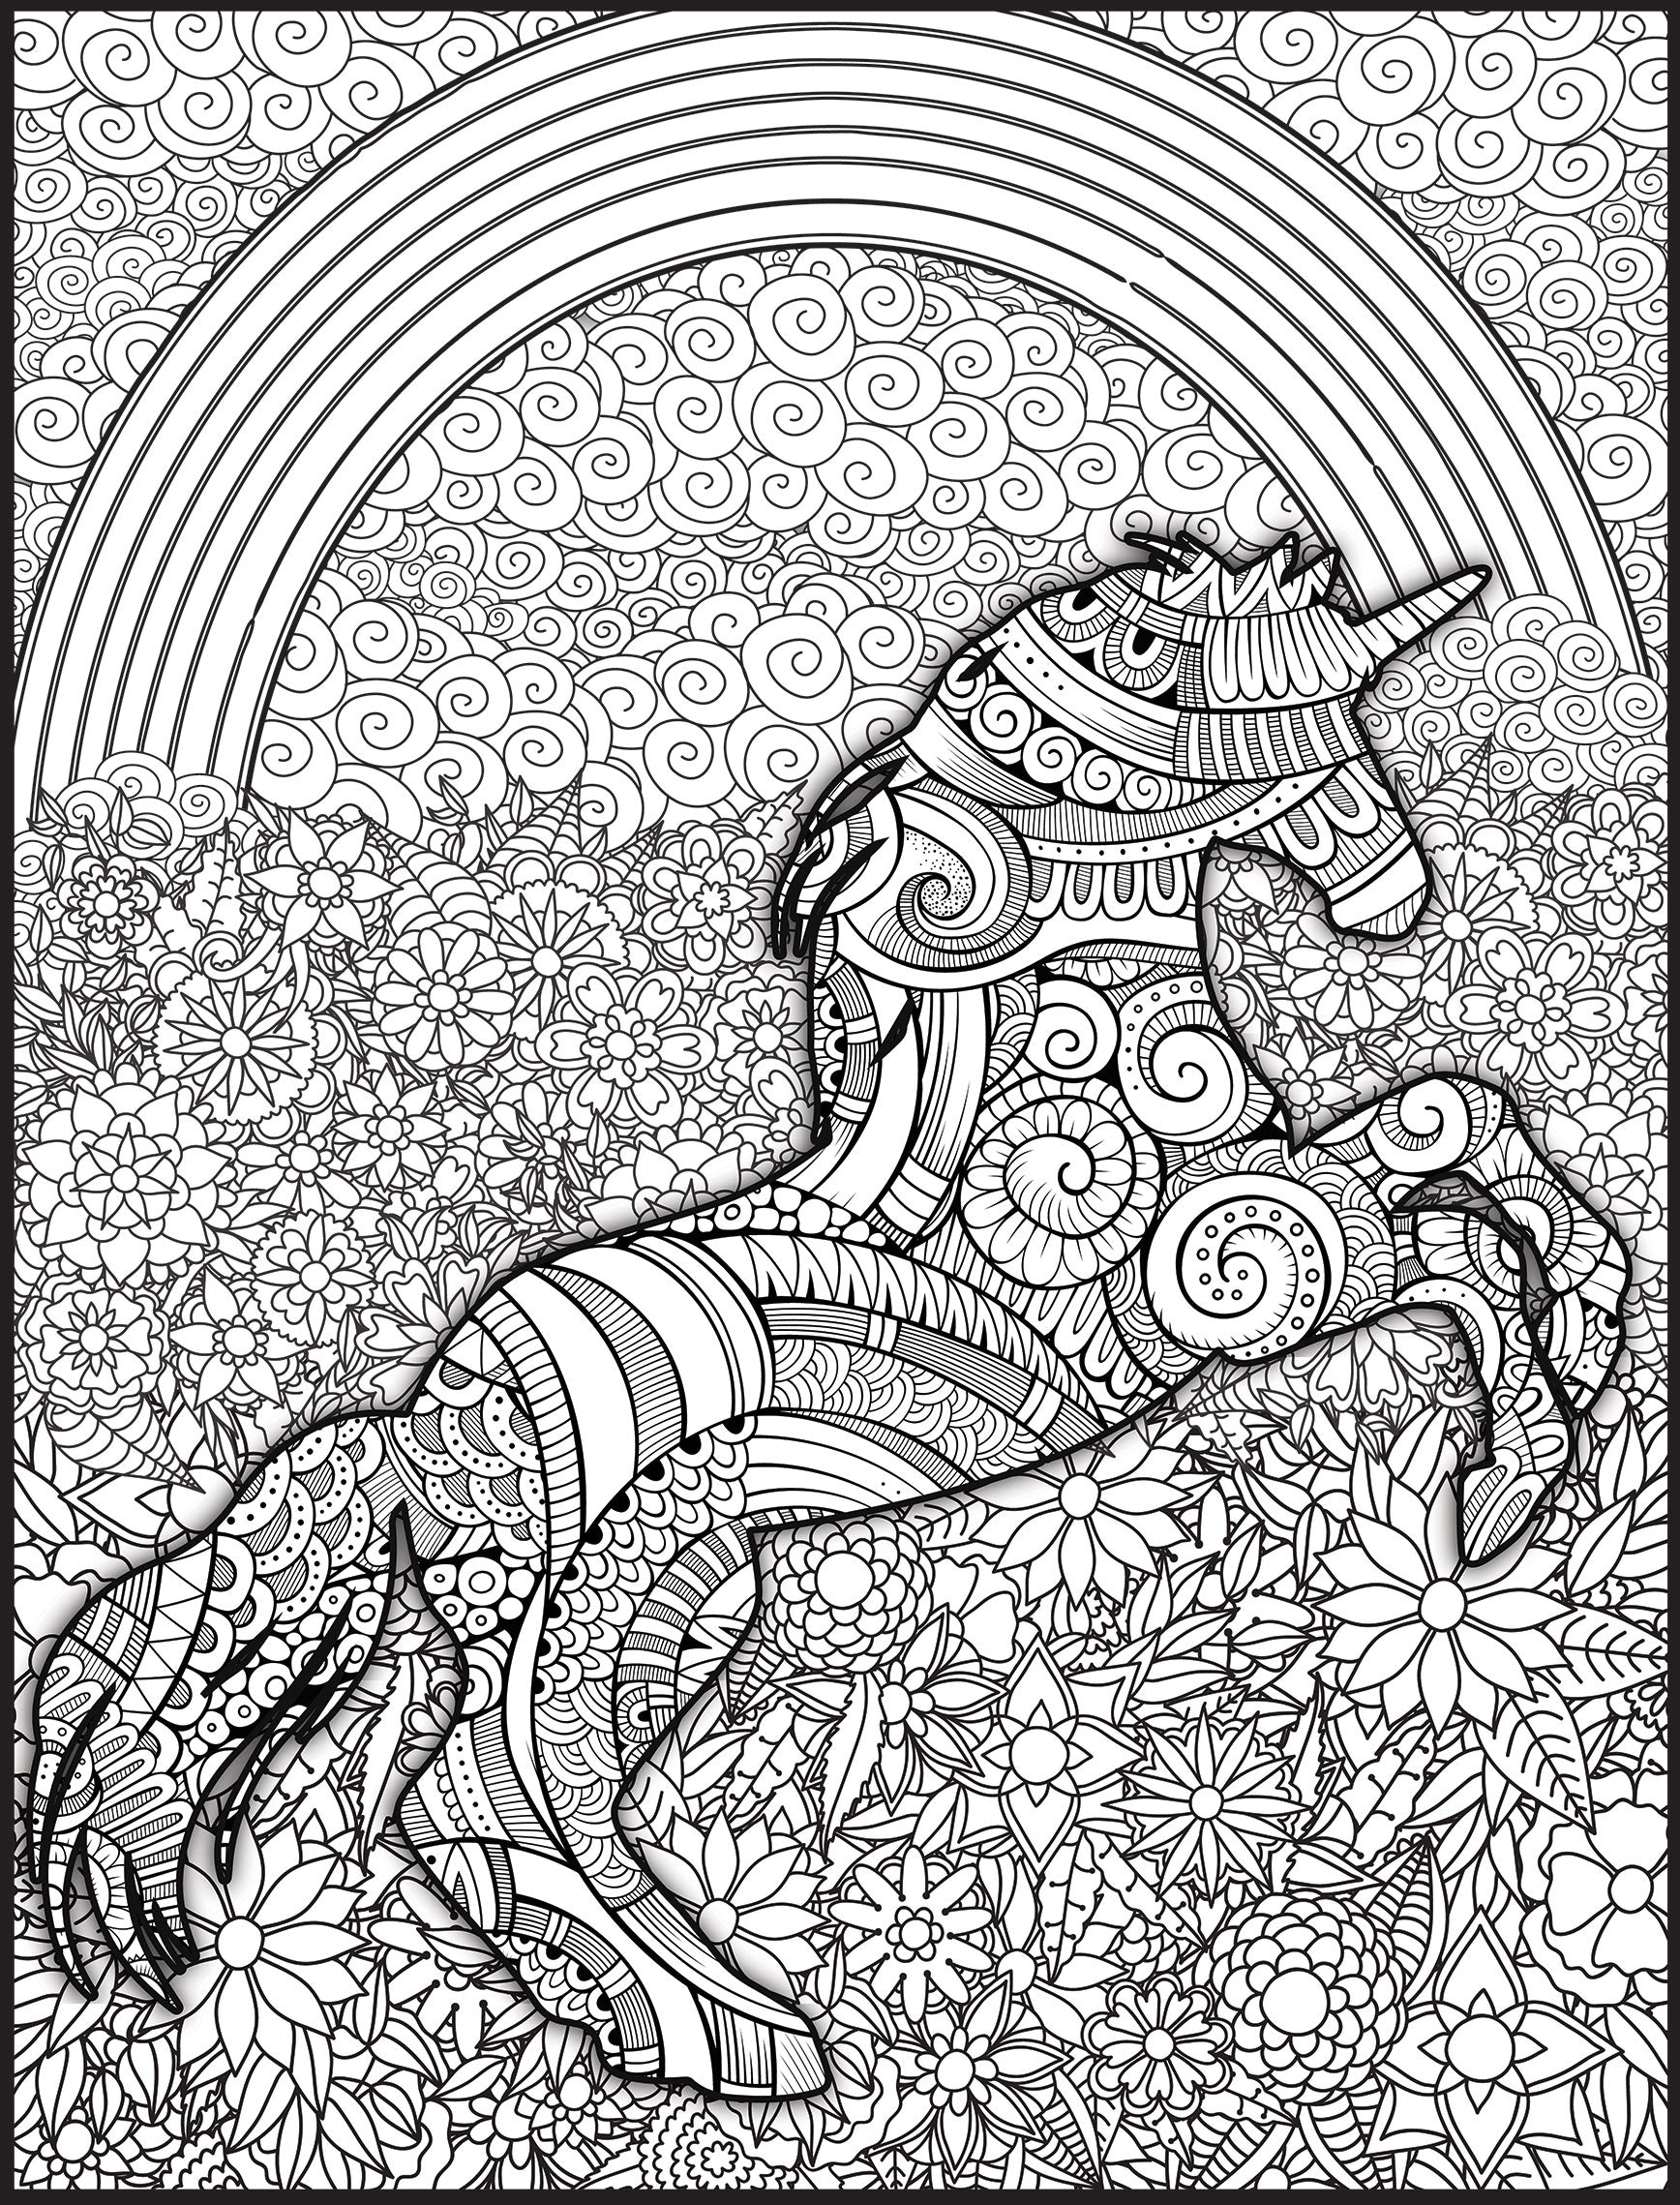 Unicorn Personalized Giant Coloring Poster 46x60 – Debbie Lynn